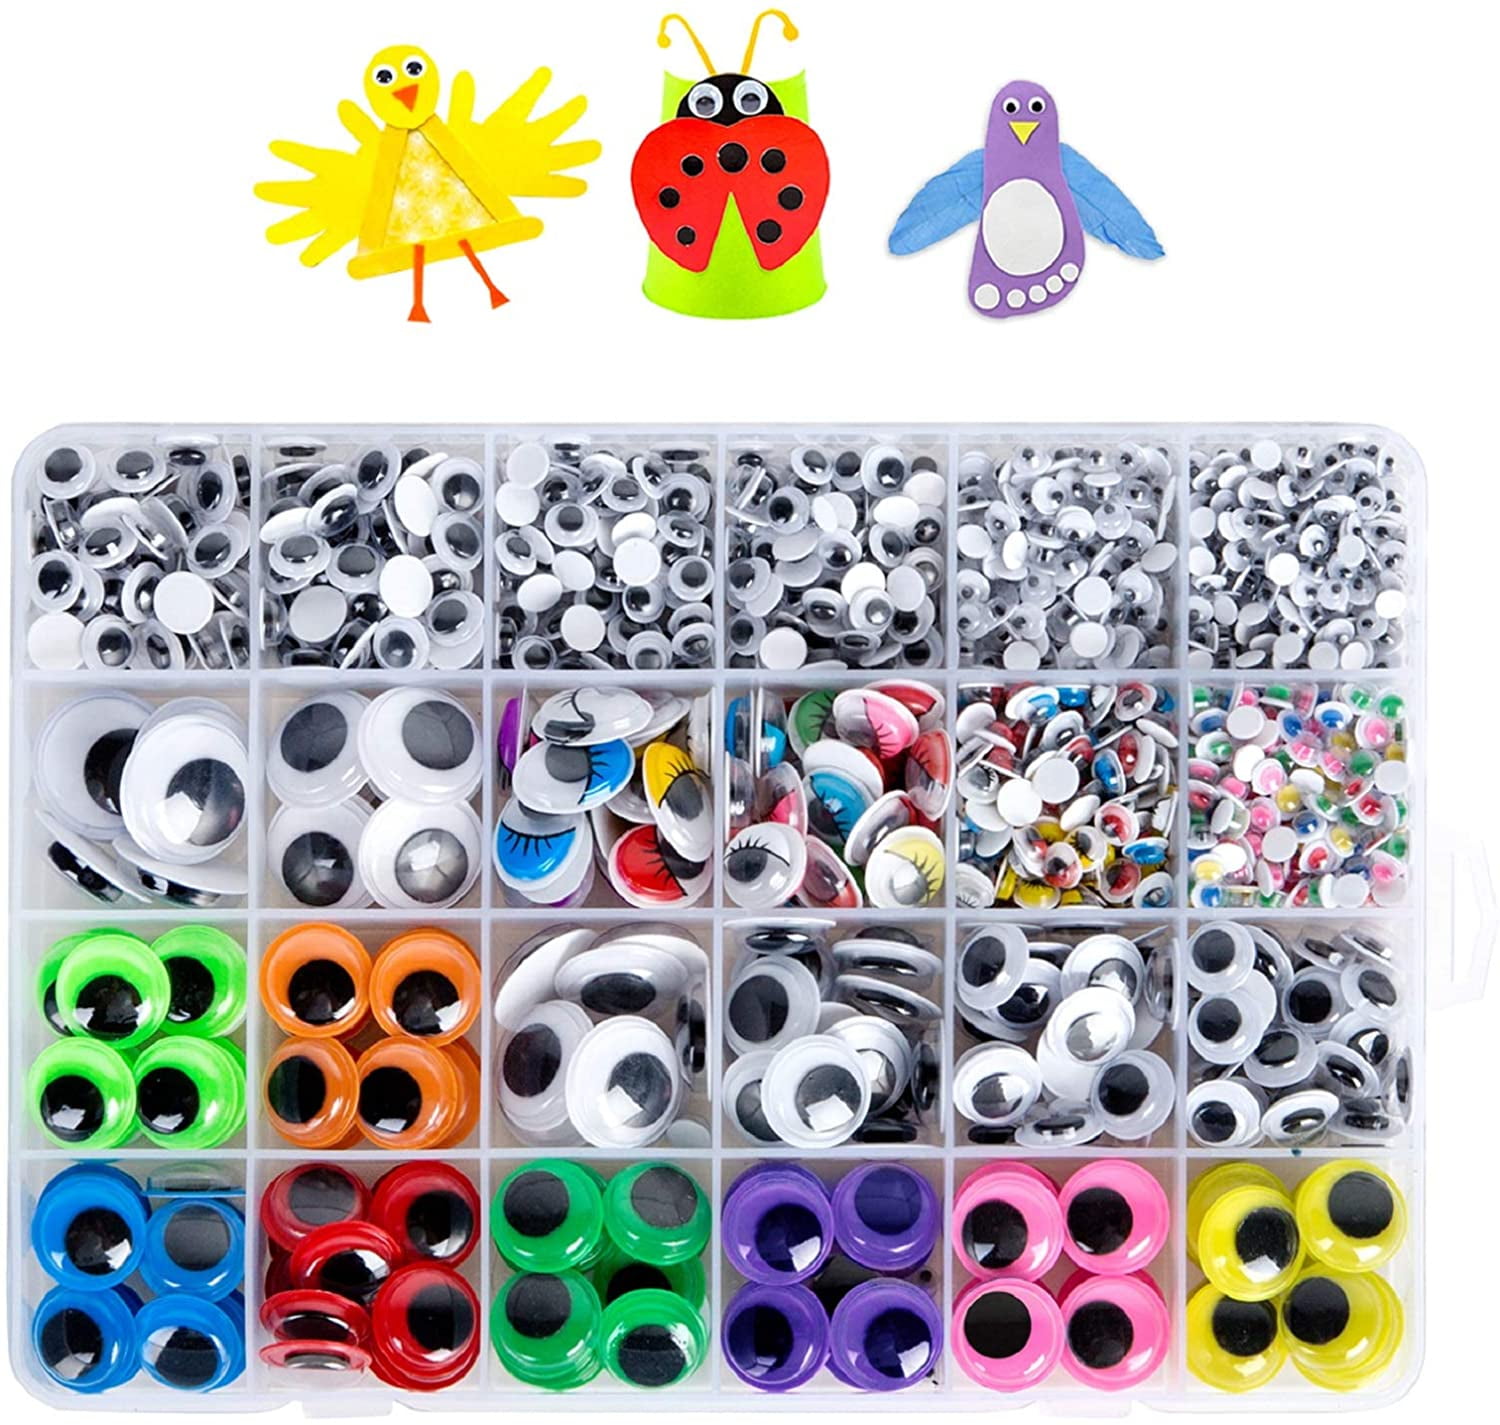 YIJU 476 Piece Mixed Sticky Wiggle Googly Eyes Assorted Sizes for Kids Craft, Size: As described